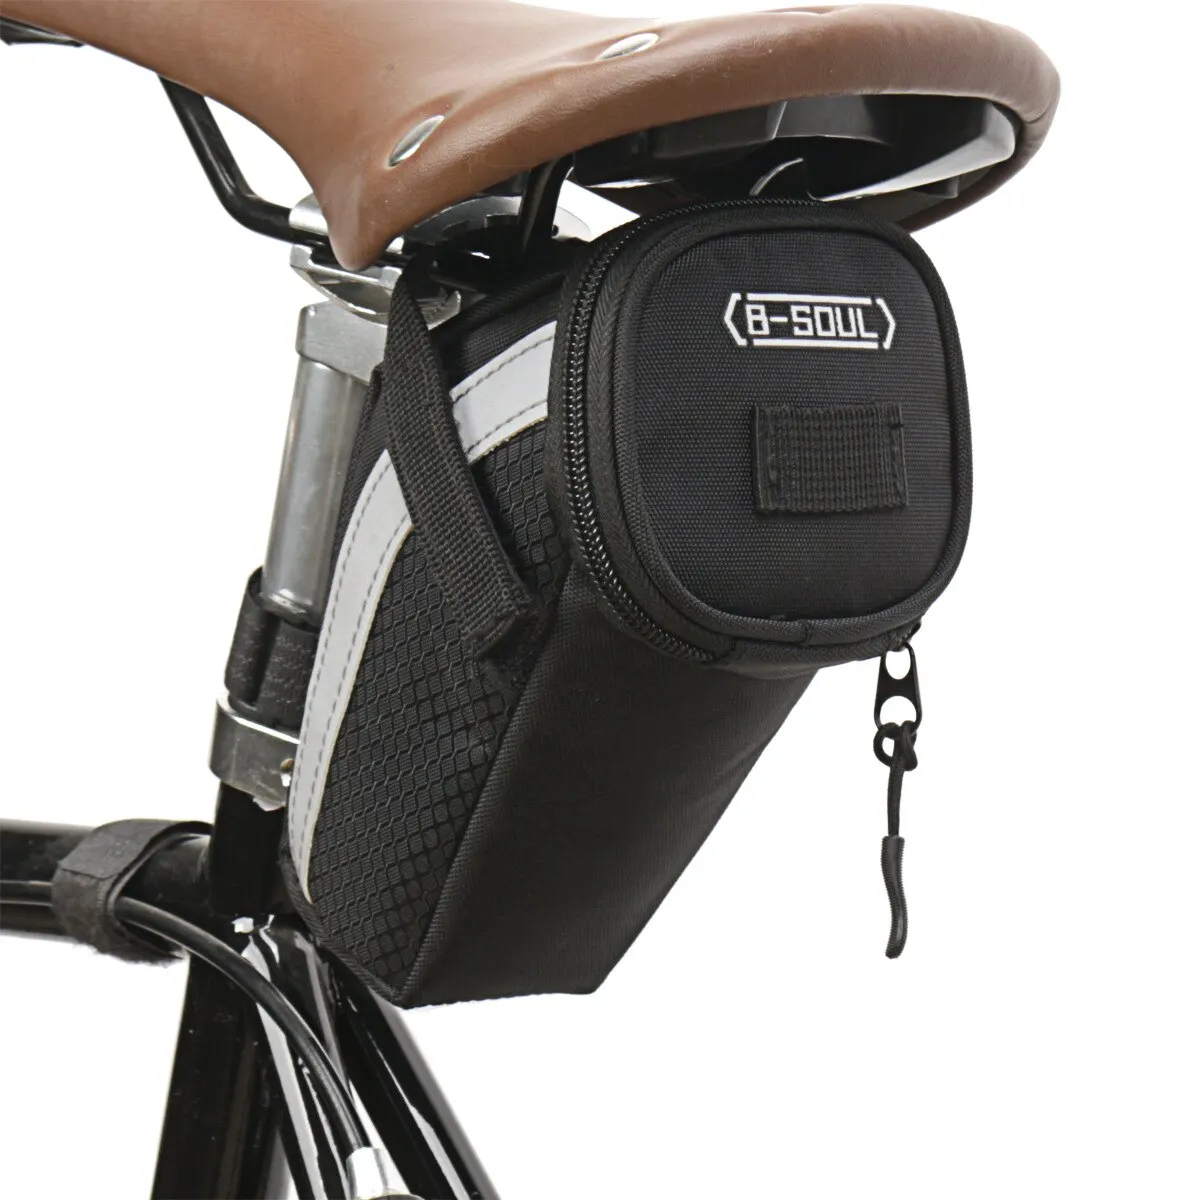 

B-SOUL Bike Saddle Bag Waterproof Tail Storage Bag Cycling Seat Rear Pouch Bag Accessory Kit Tool Reflective Cycling Accessories